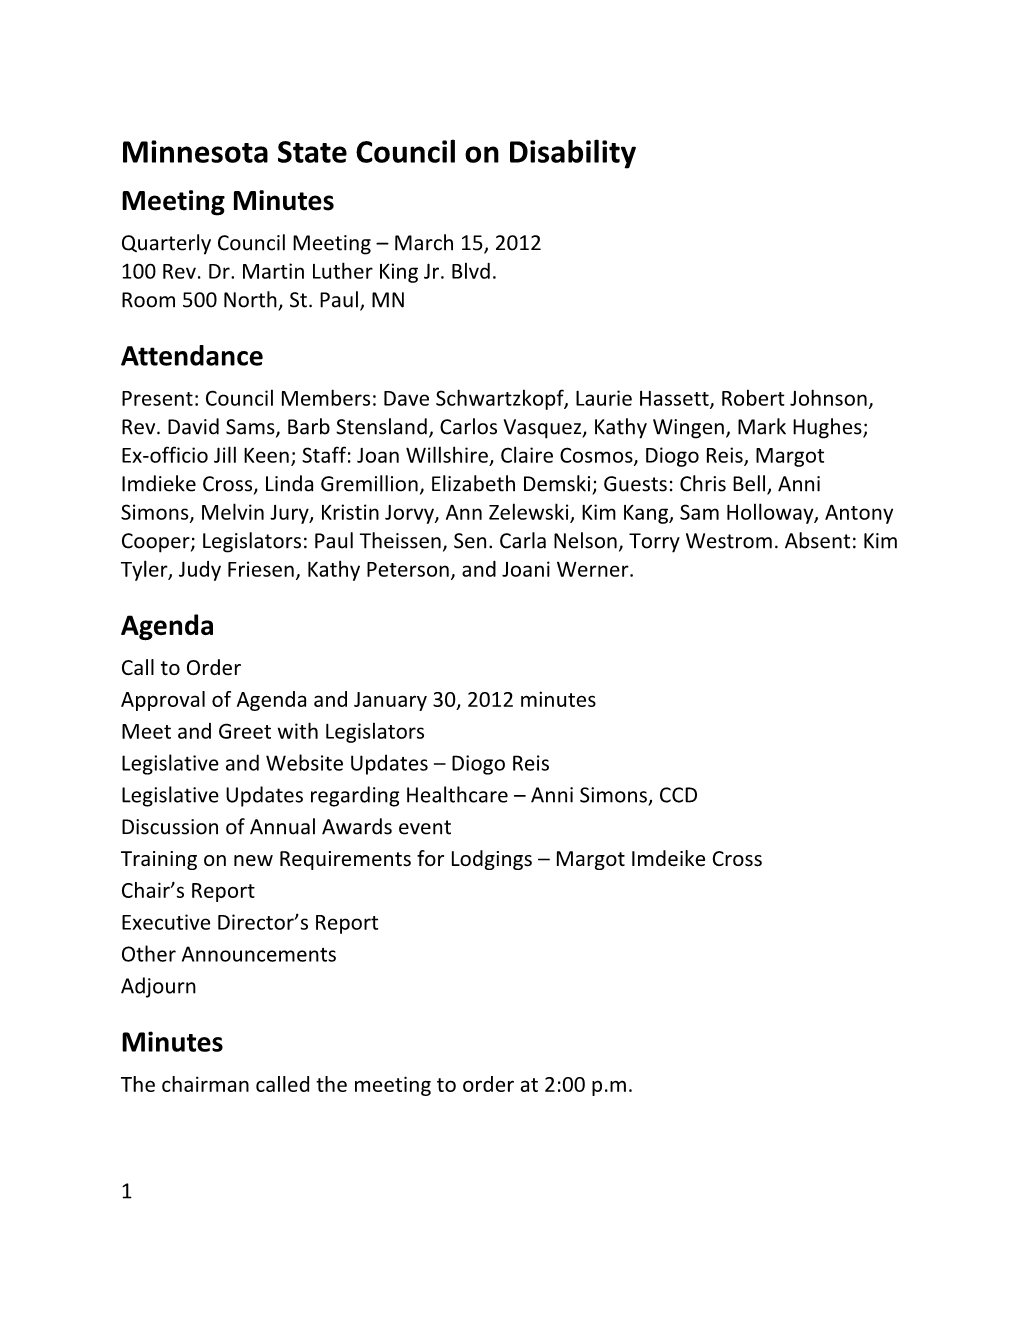 MSCOD Quarterly Council Meeting Minutes, 03/15/2012